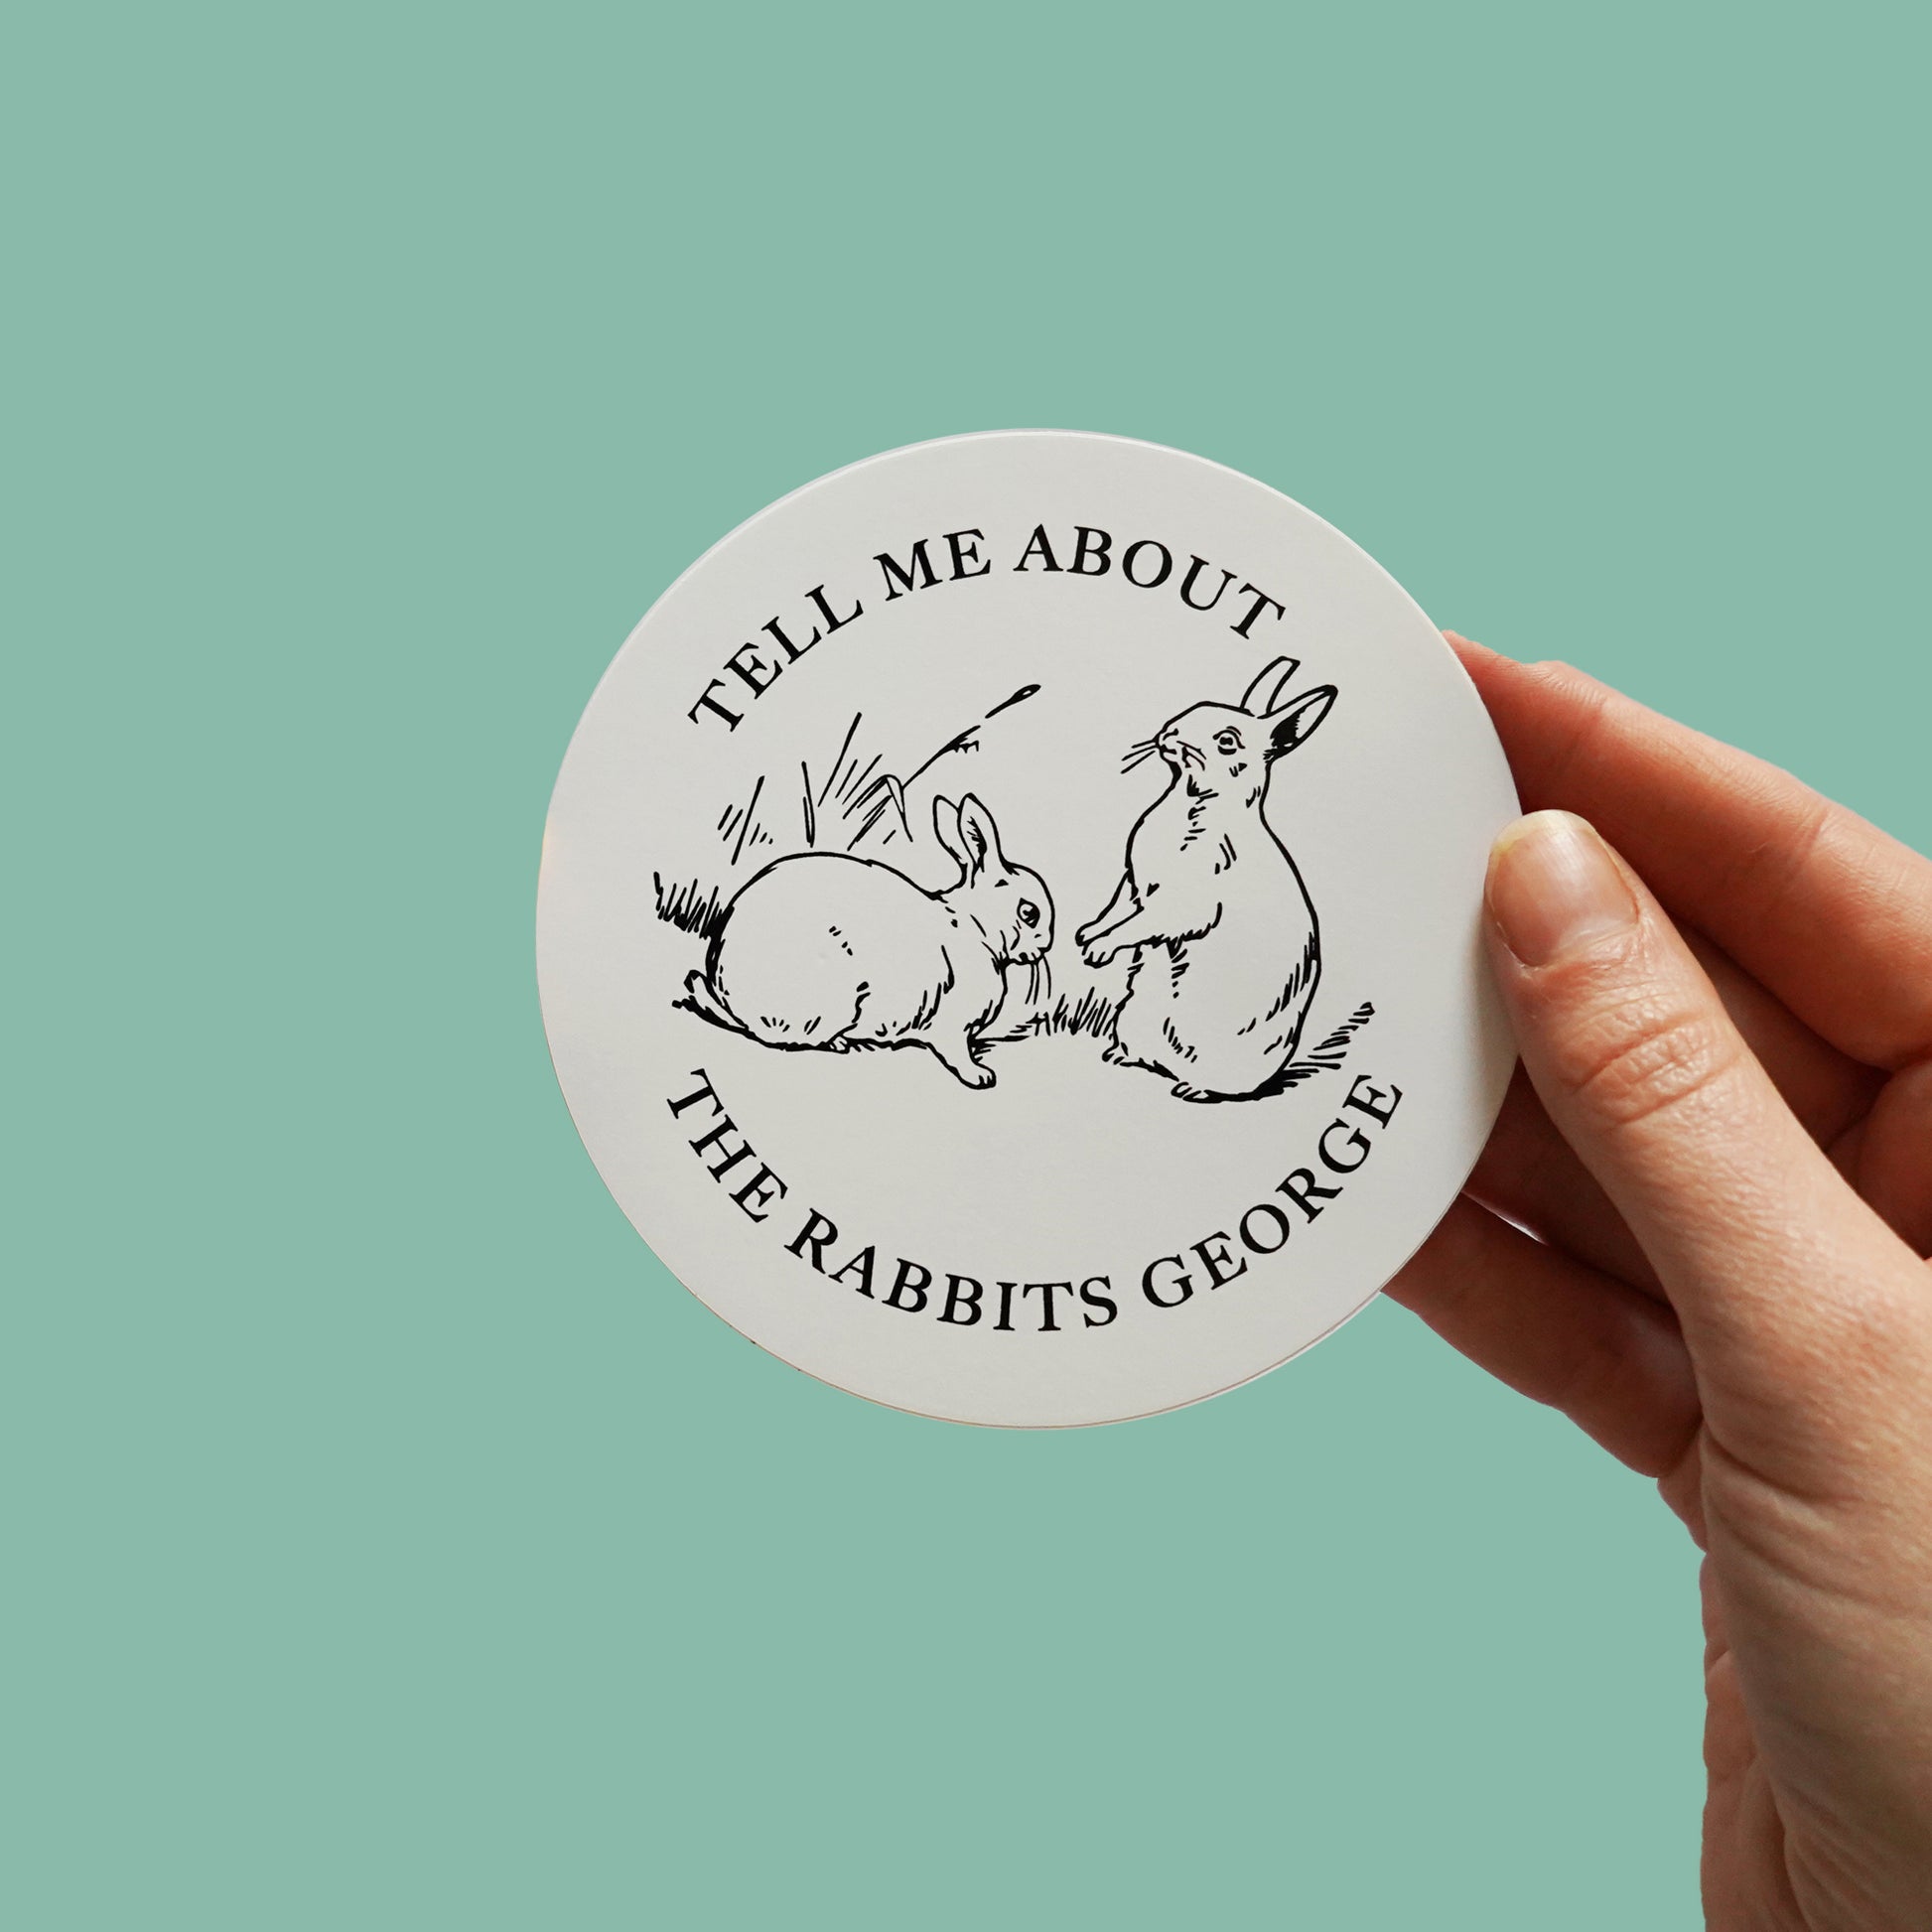 Tell Me About The Rabbits George Sticker John Steinbeck of mice and men